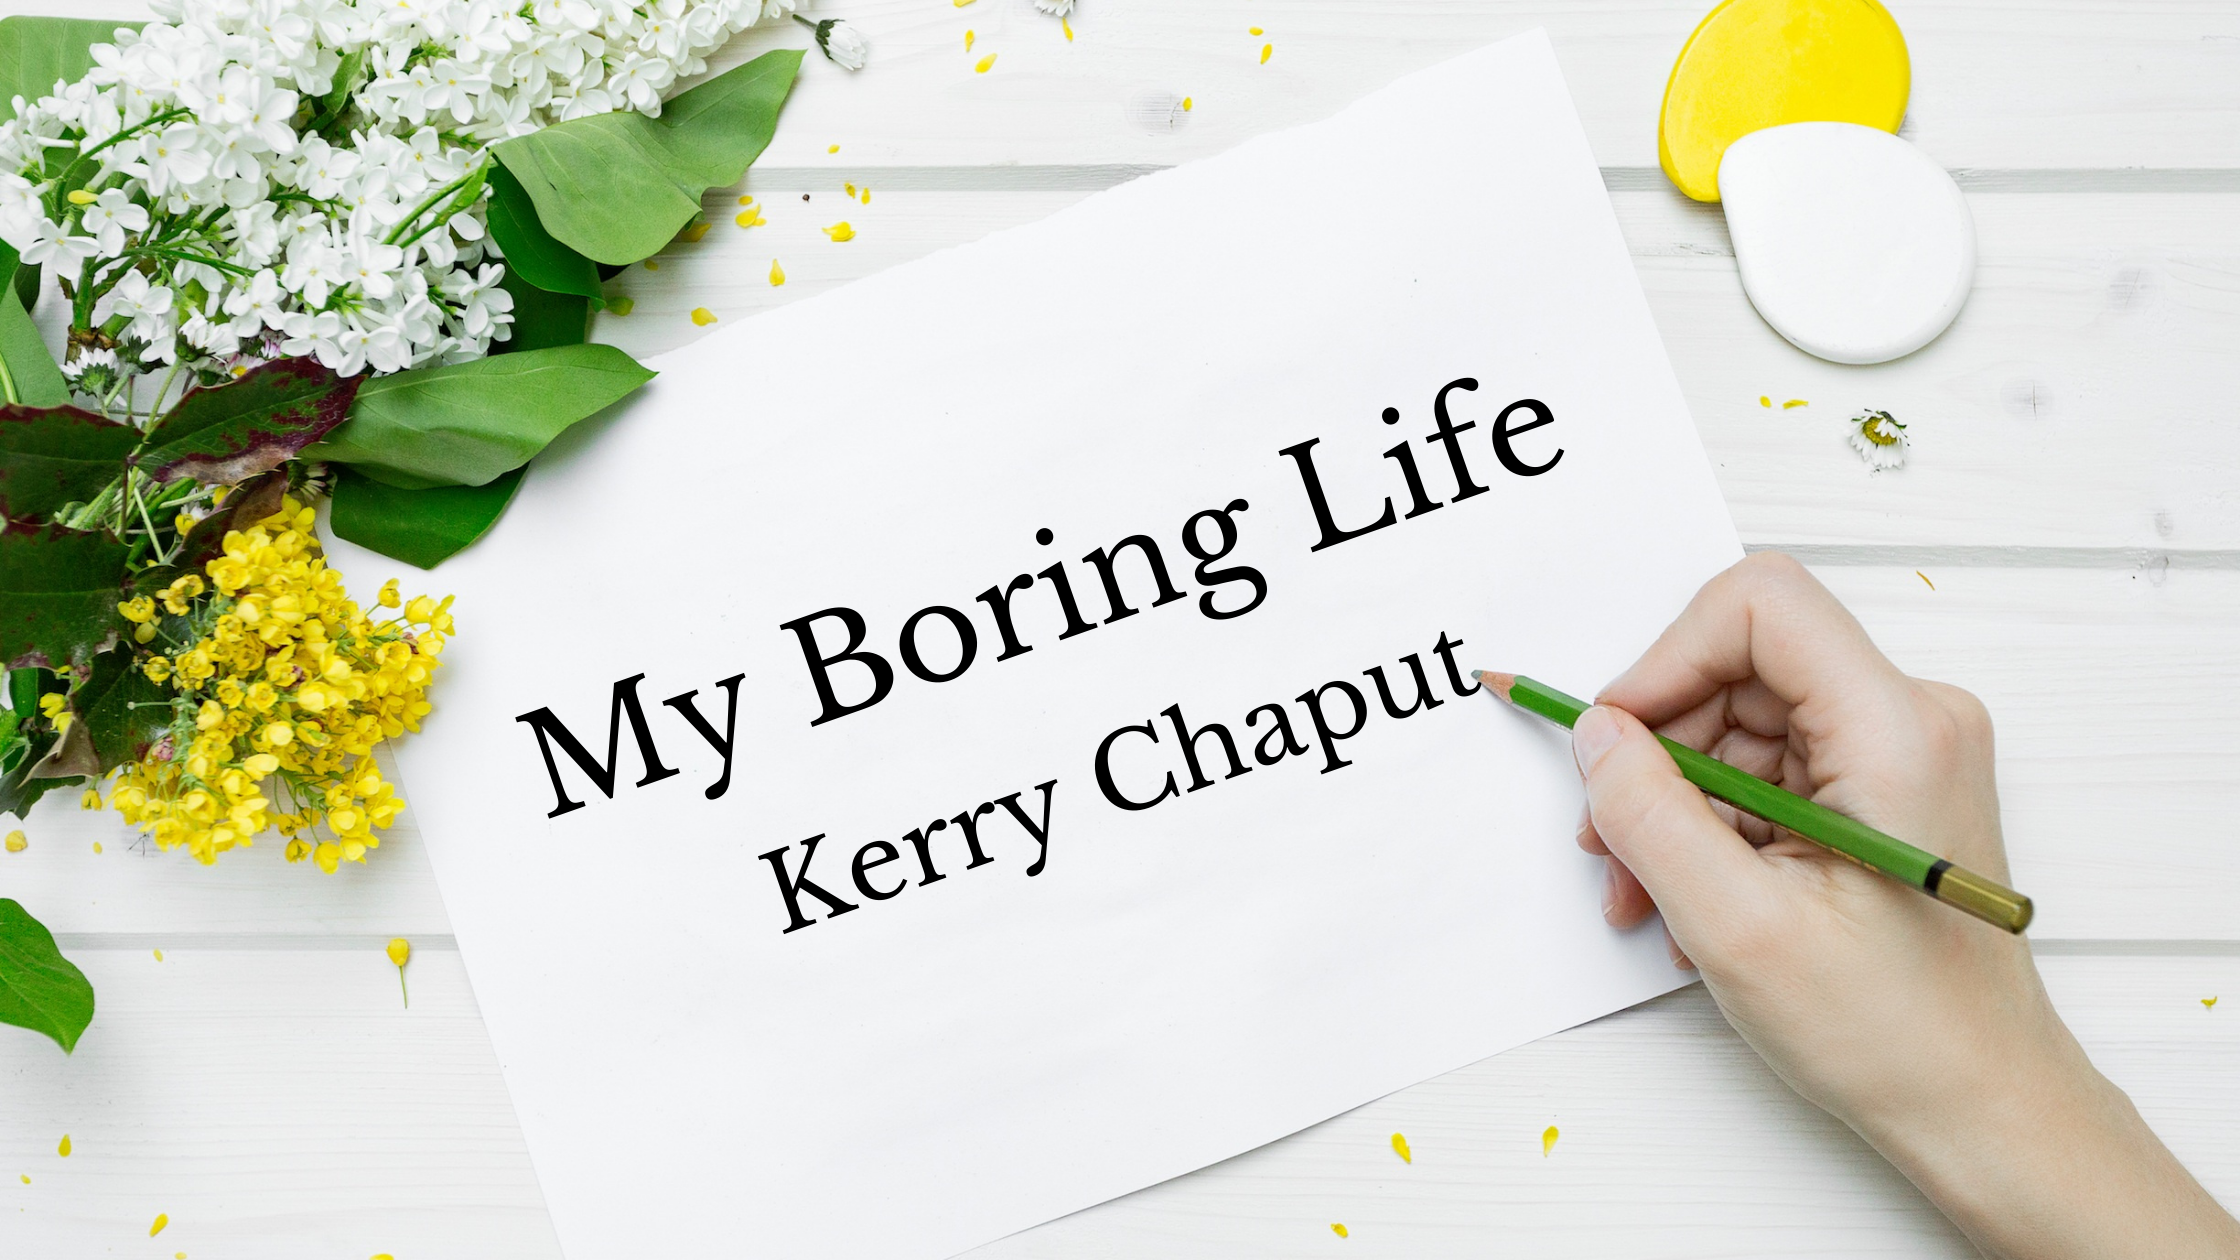 Book Review: My Boring Life by Kerry Chaput